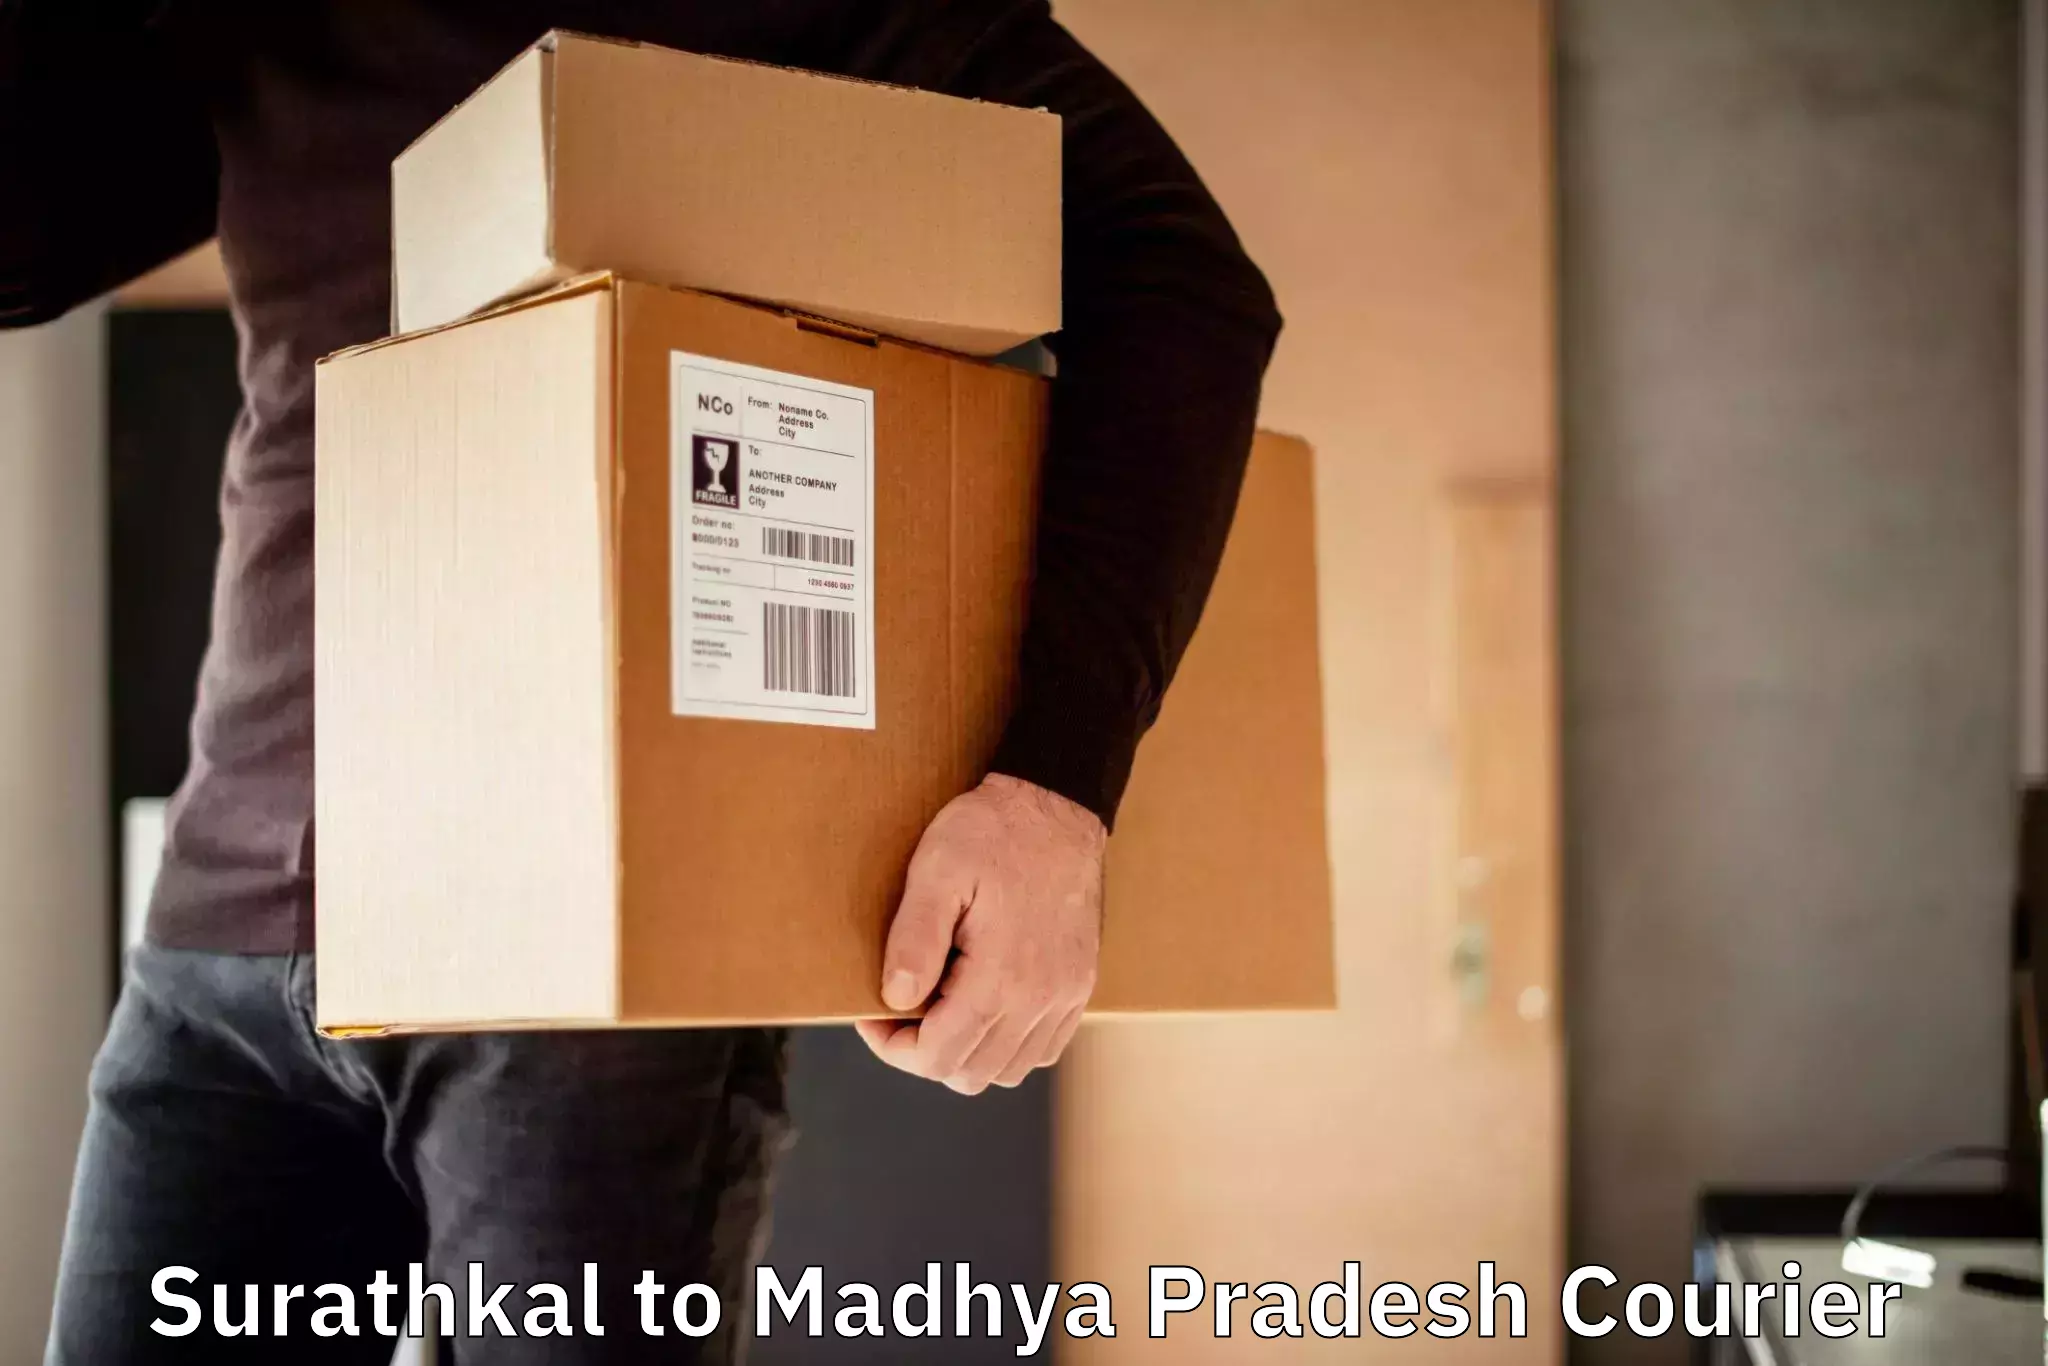 Multi-national courier services Surathkal to Raipur Karchuliyan